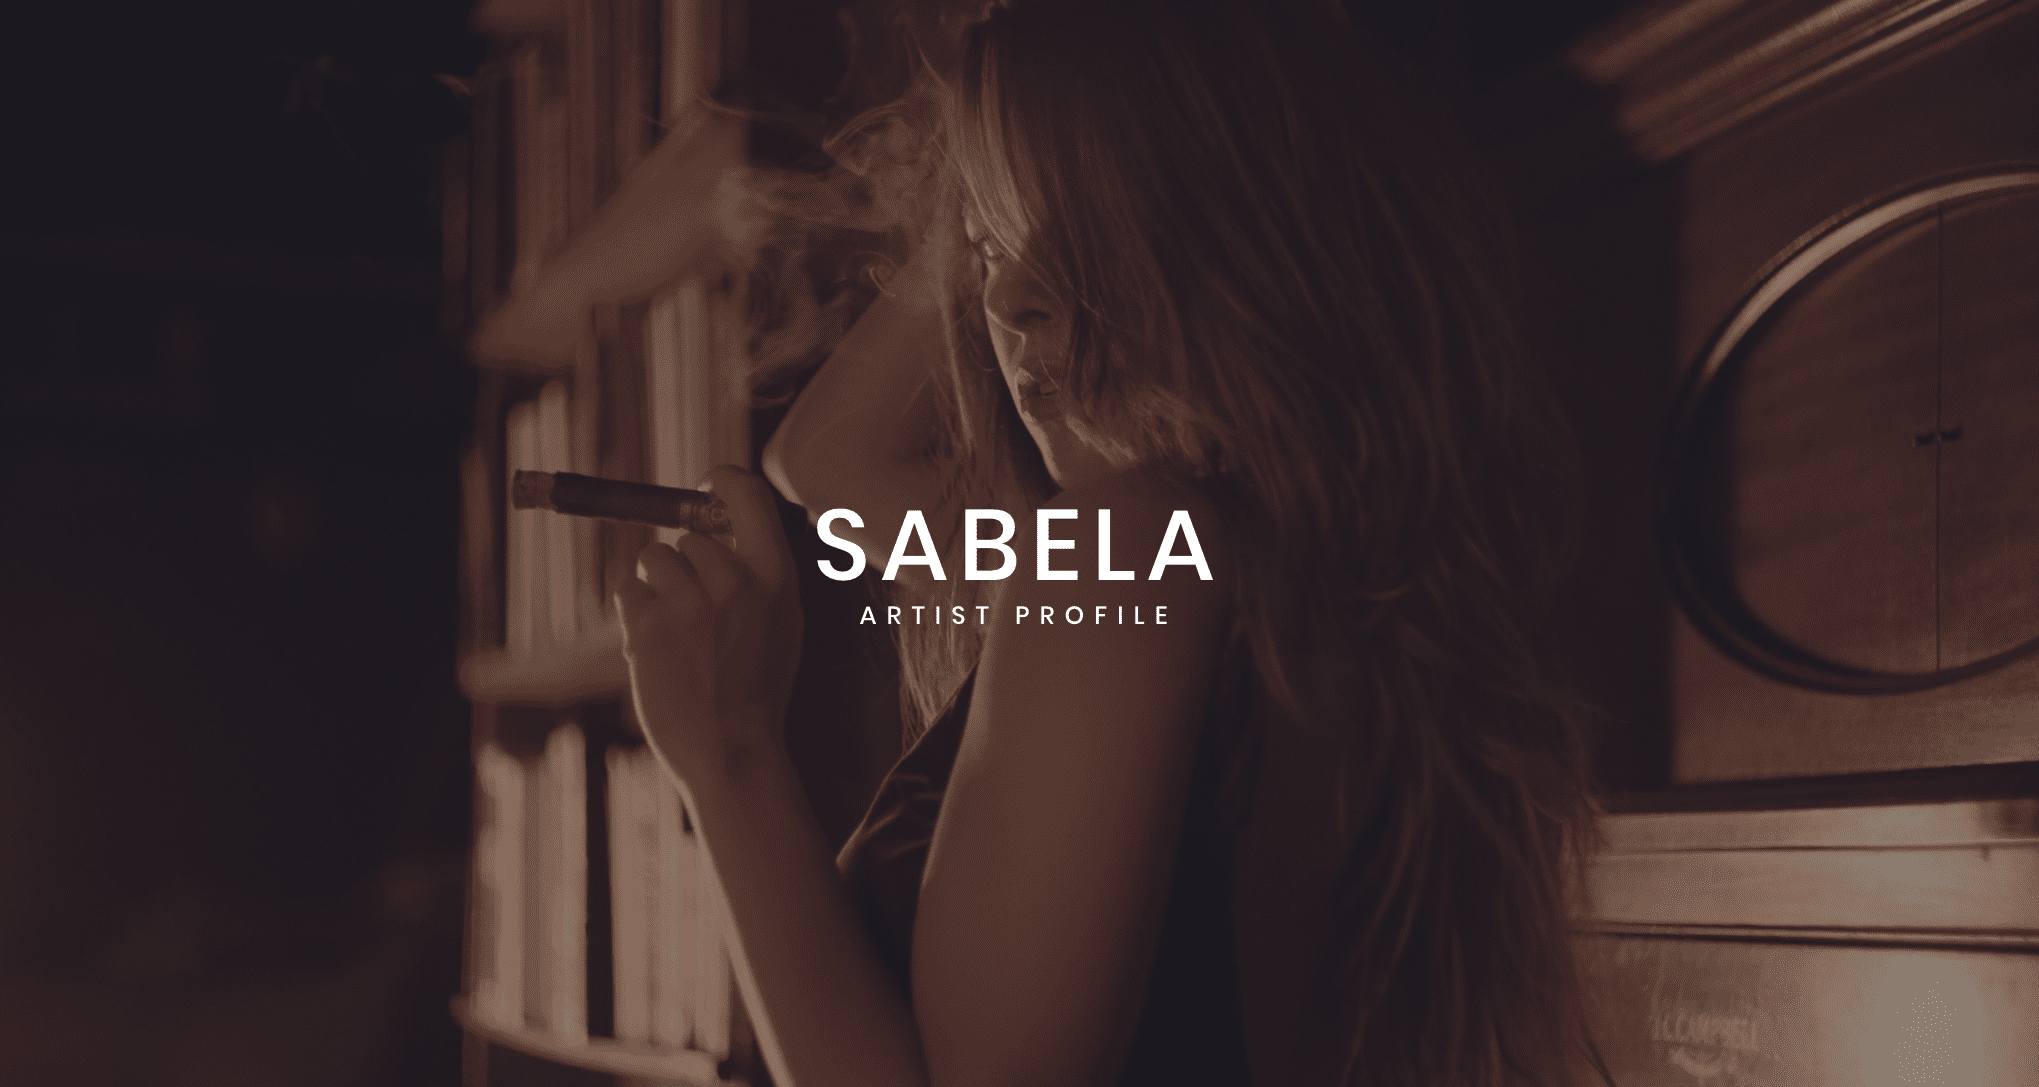 Audio Services by C&I Studios White Sabelo Artist Profile logo against a backdrop of a side profile of a woman with long hair smoking a cigar posing for the camera looking over her shoulder